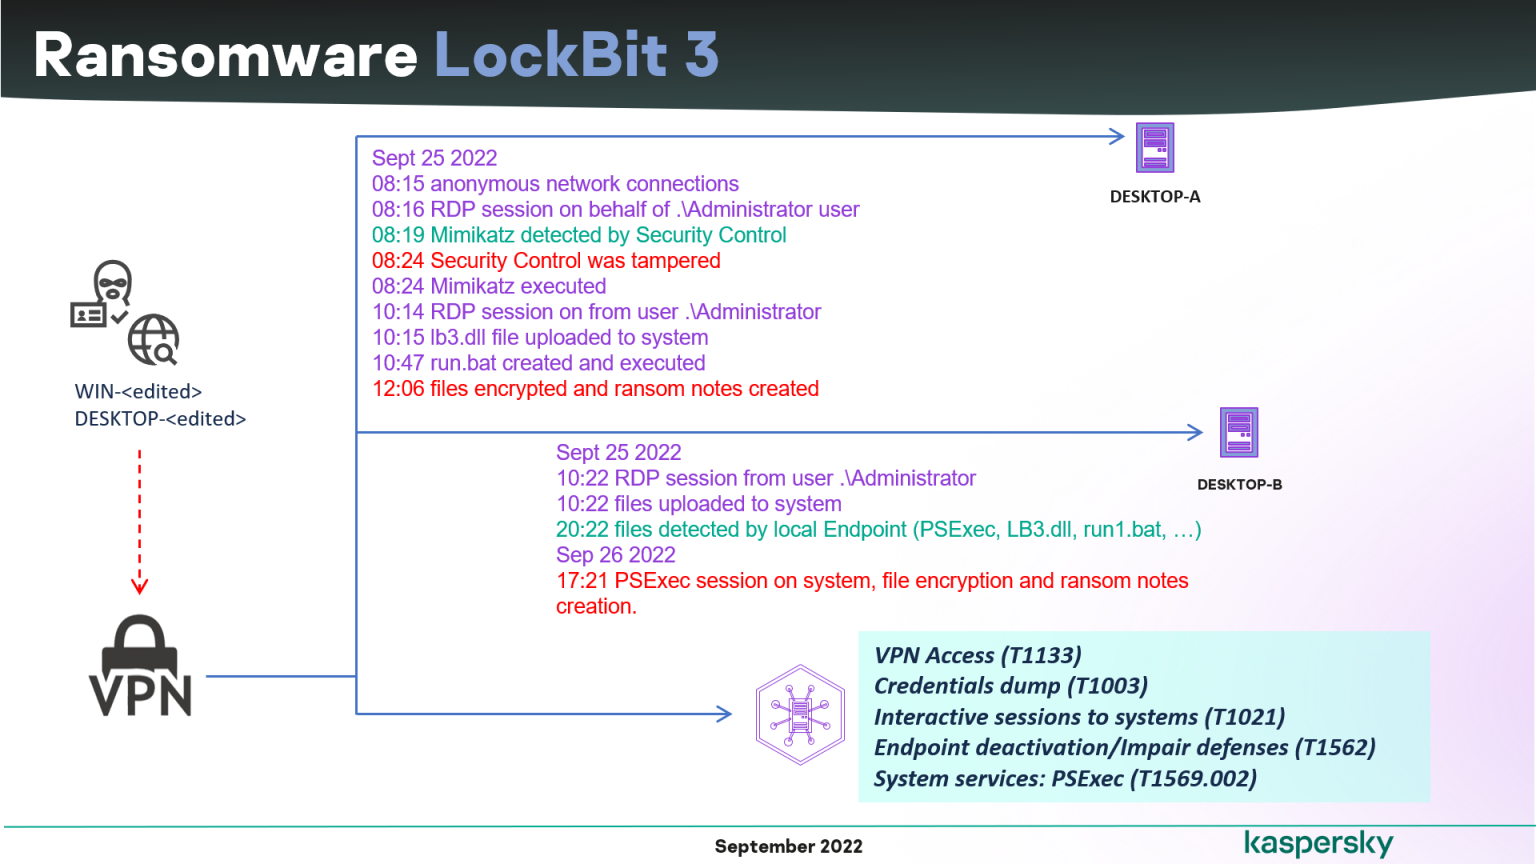 Leaked LockBit 3.0 ransomware builder used by multiple threat actors – Source: securityaffairs.com